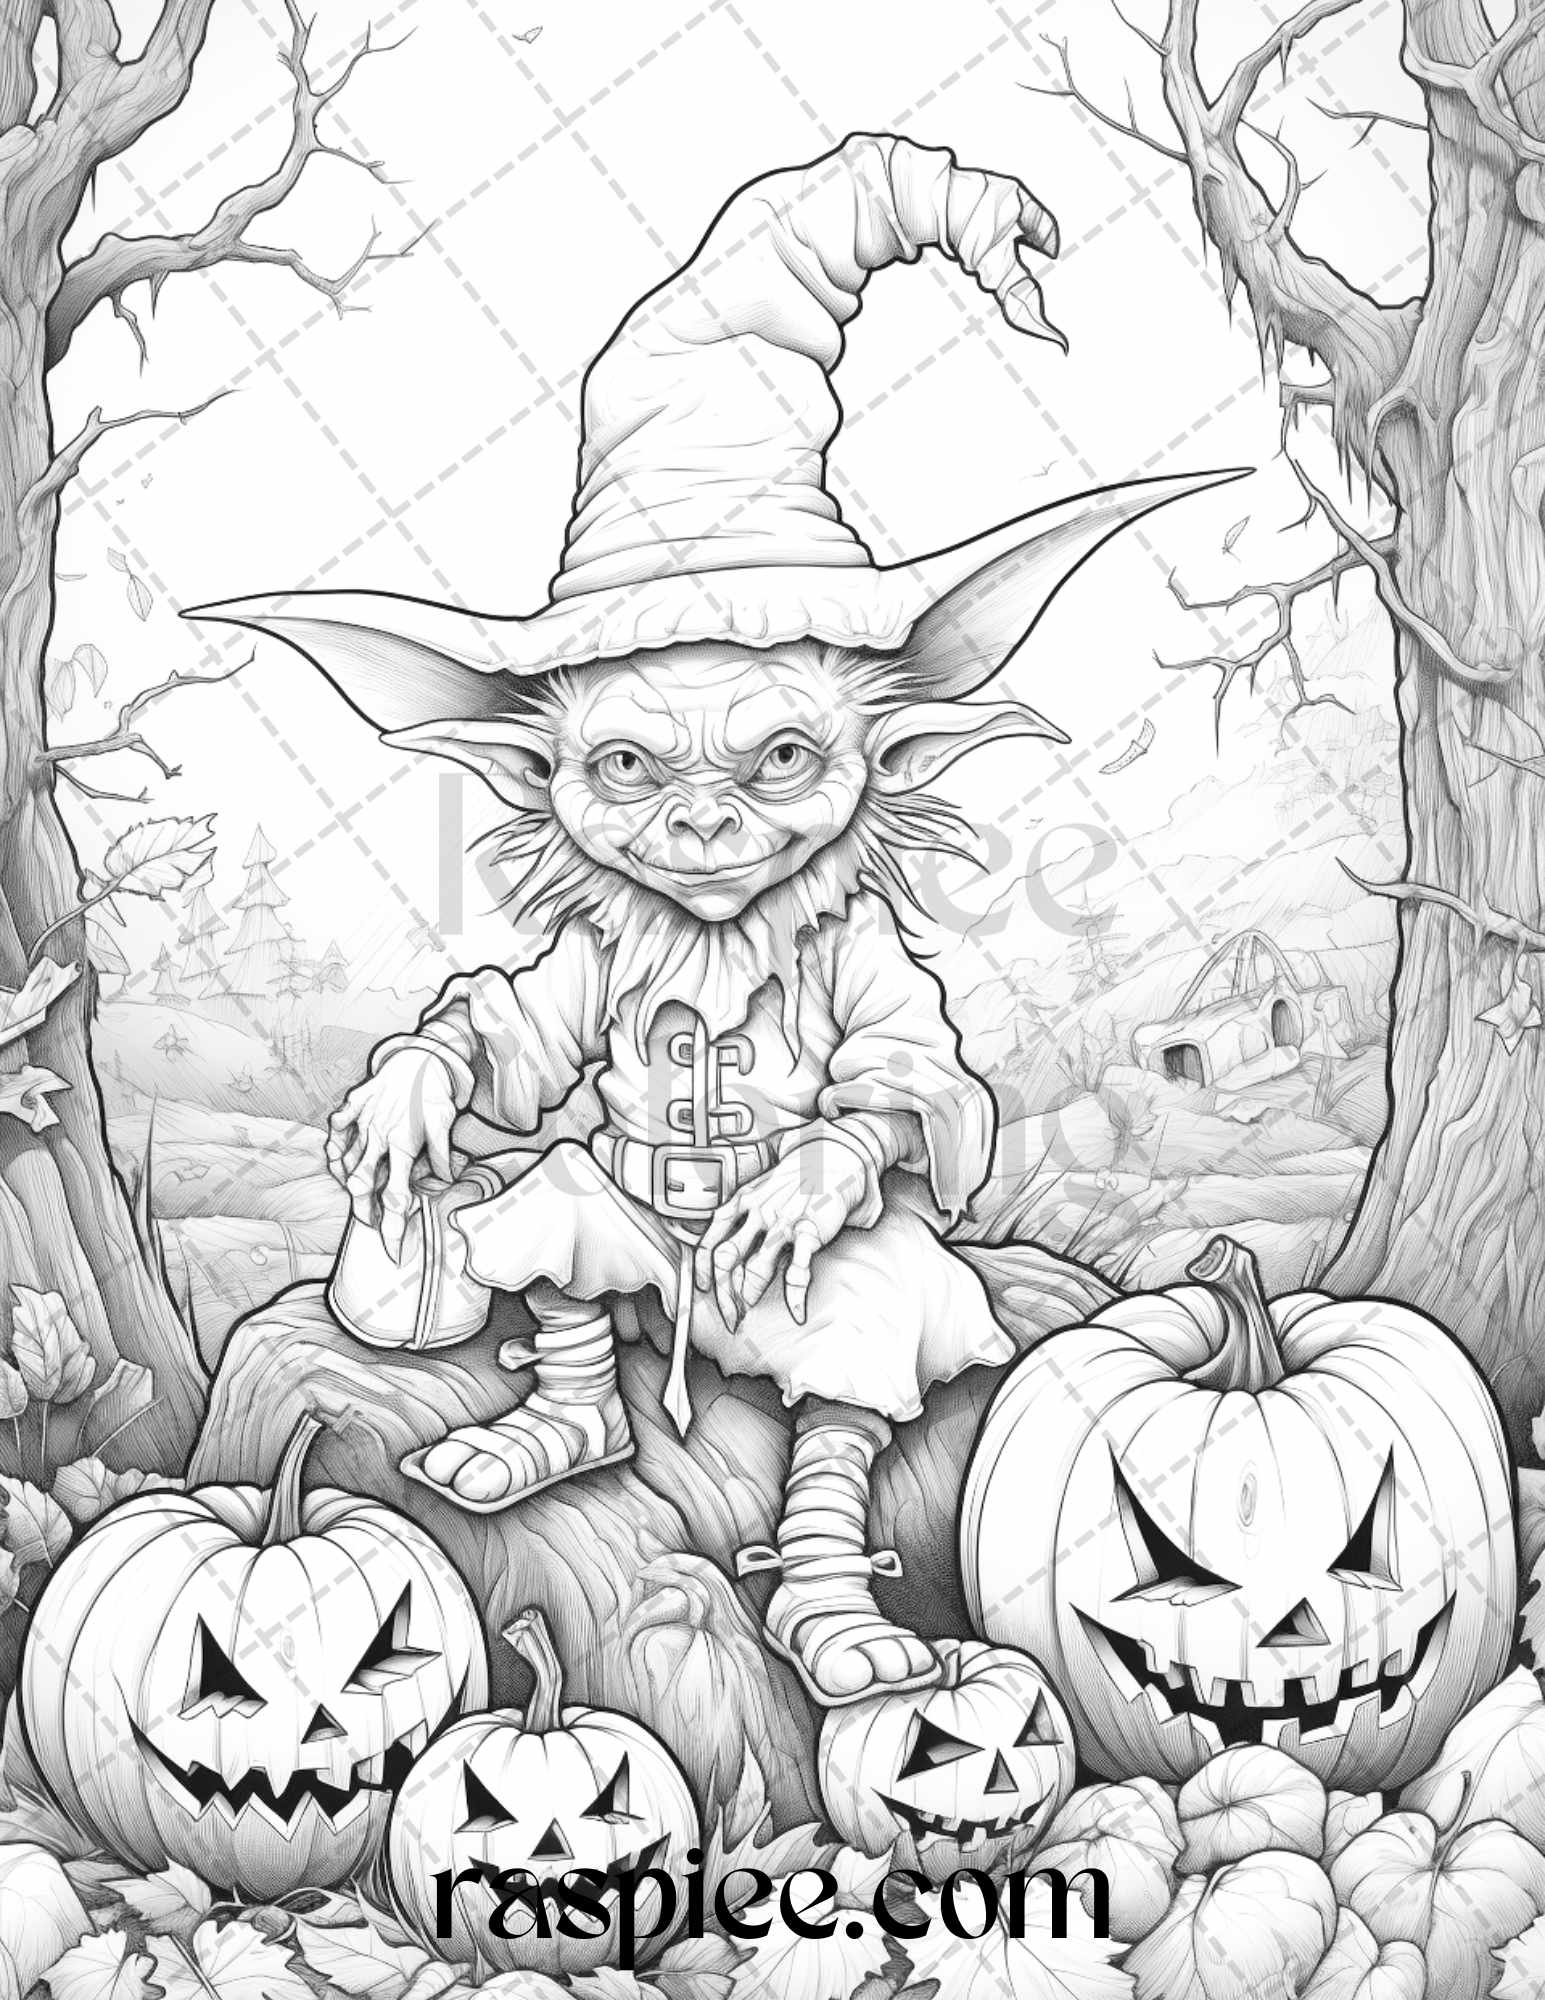 Halloween Goblin Coloring Page, Adult Grayscale Coloring Printable, Spooky Goblin Art Sheet, Halloween Coloring Book Page, Printable Halloween Decor, Stress Relief Coloring, DIY Halloween Craft, Detailed Goblin Drawing, Creepy Halloween Art, Halloween Grayscale Coloring Pages